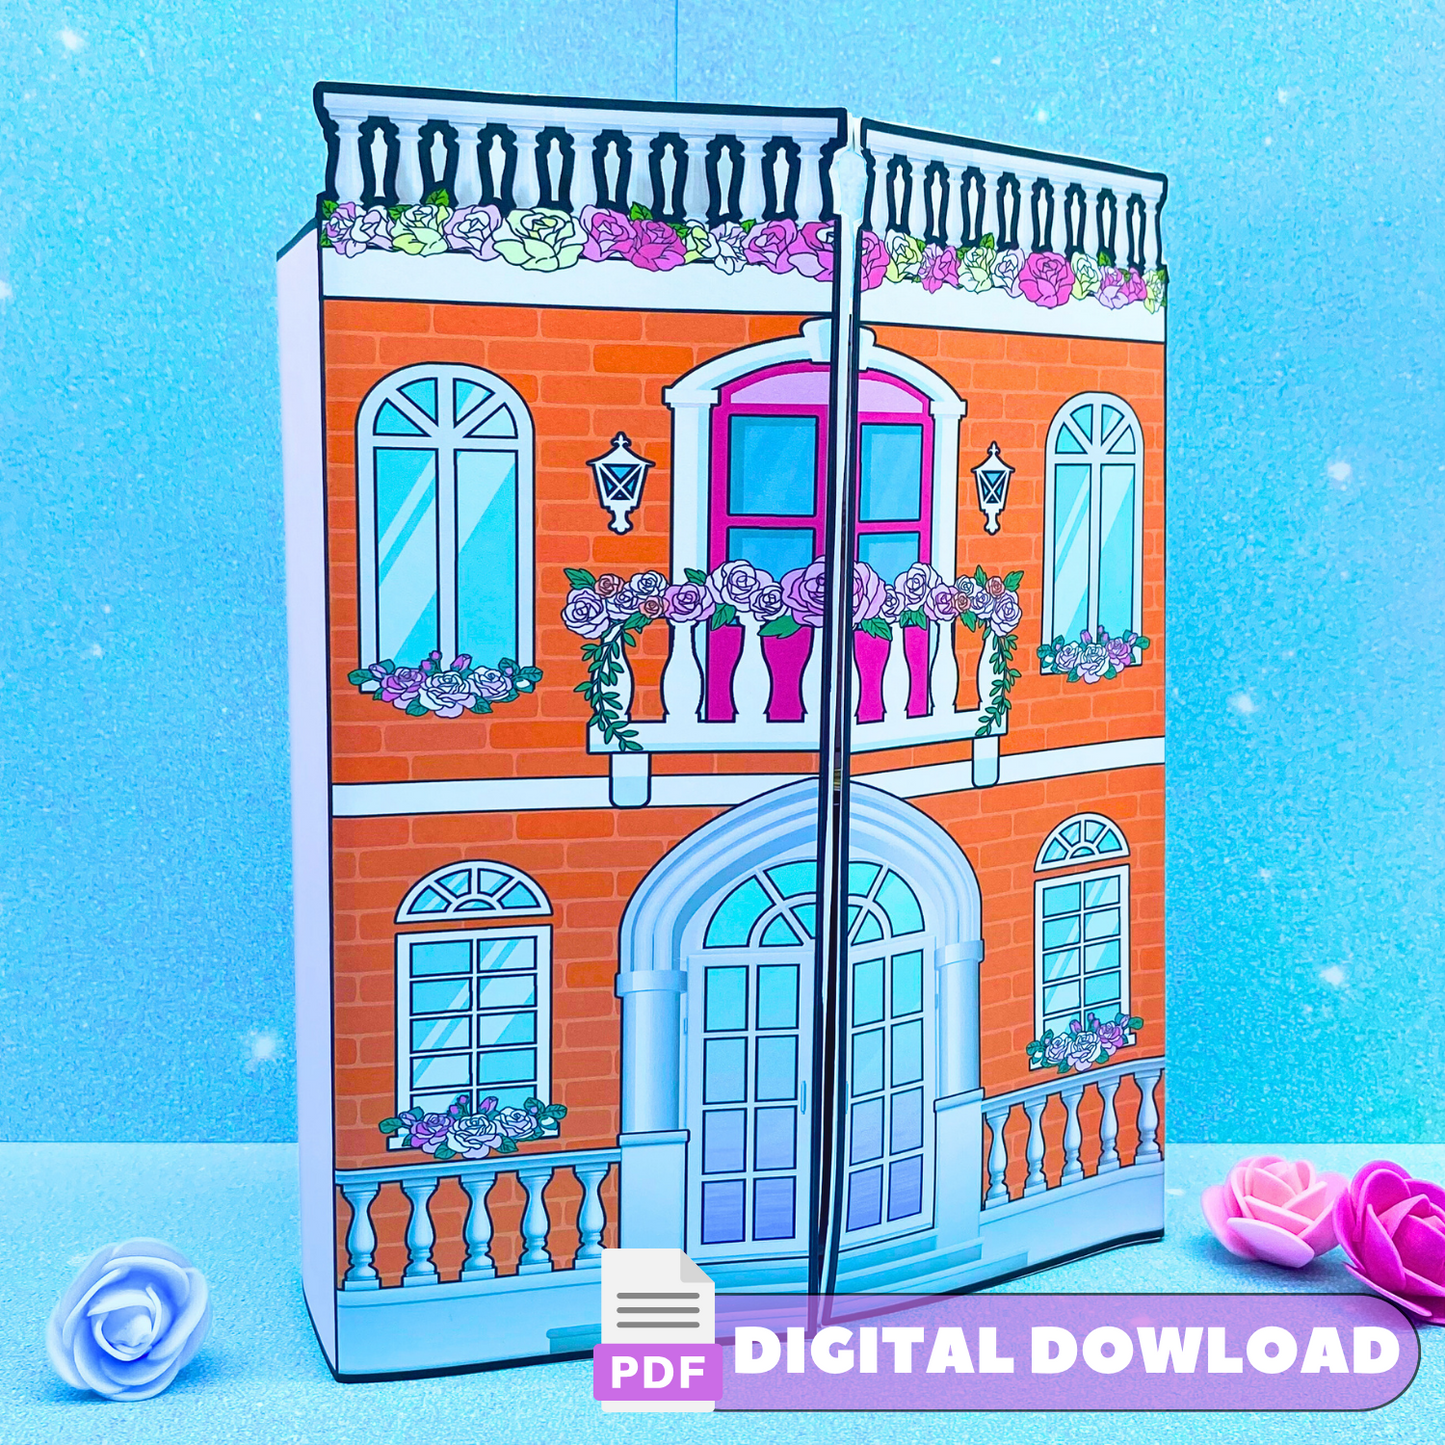 Vintage Royal Doll House Box - Build 3D Printable Dollhouse Kit 🌈 Pop Up House | Printable Toys | A4 DIY | Crafting | Instant Download 🌈 Woa Doll Crafts